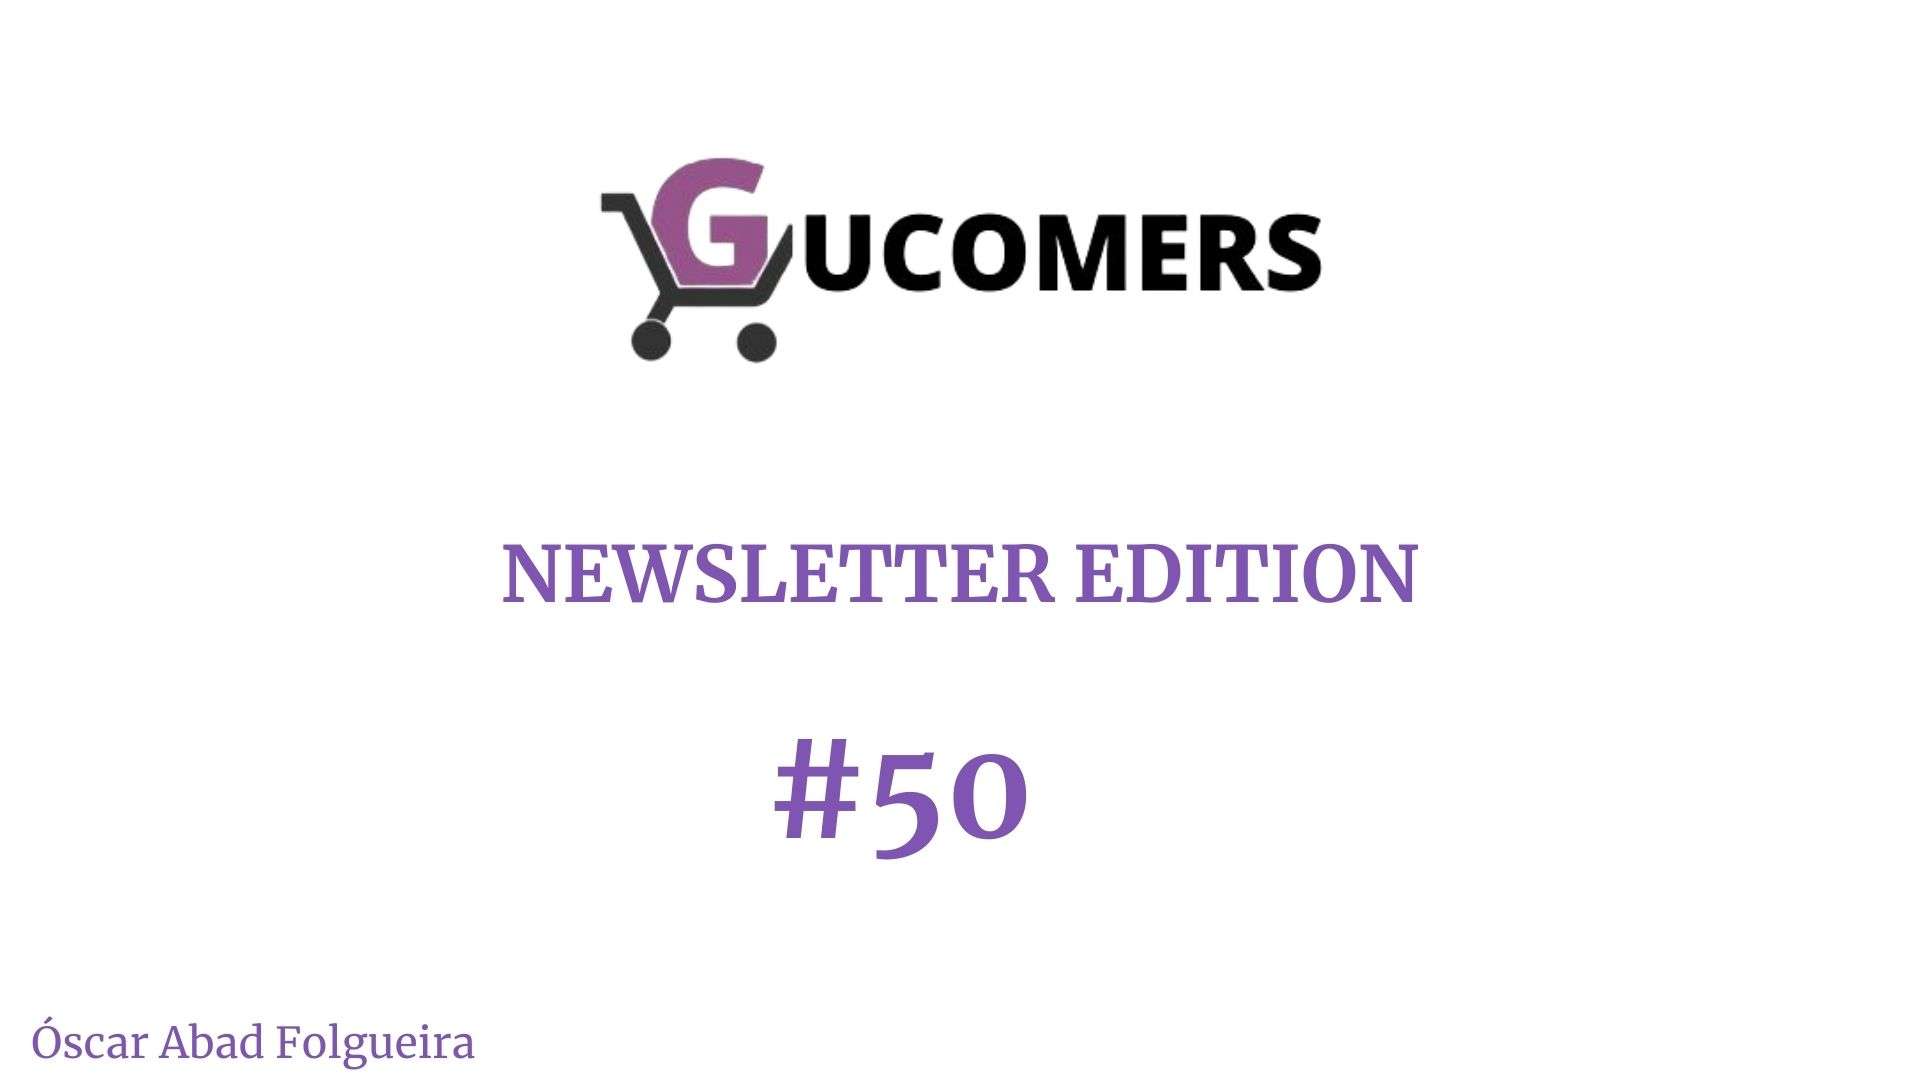 Newsletter Gucomers #50 – ¡50 nada menos!